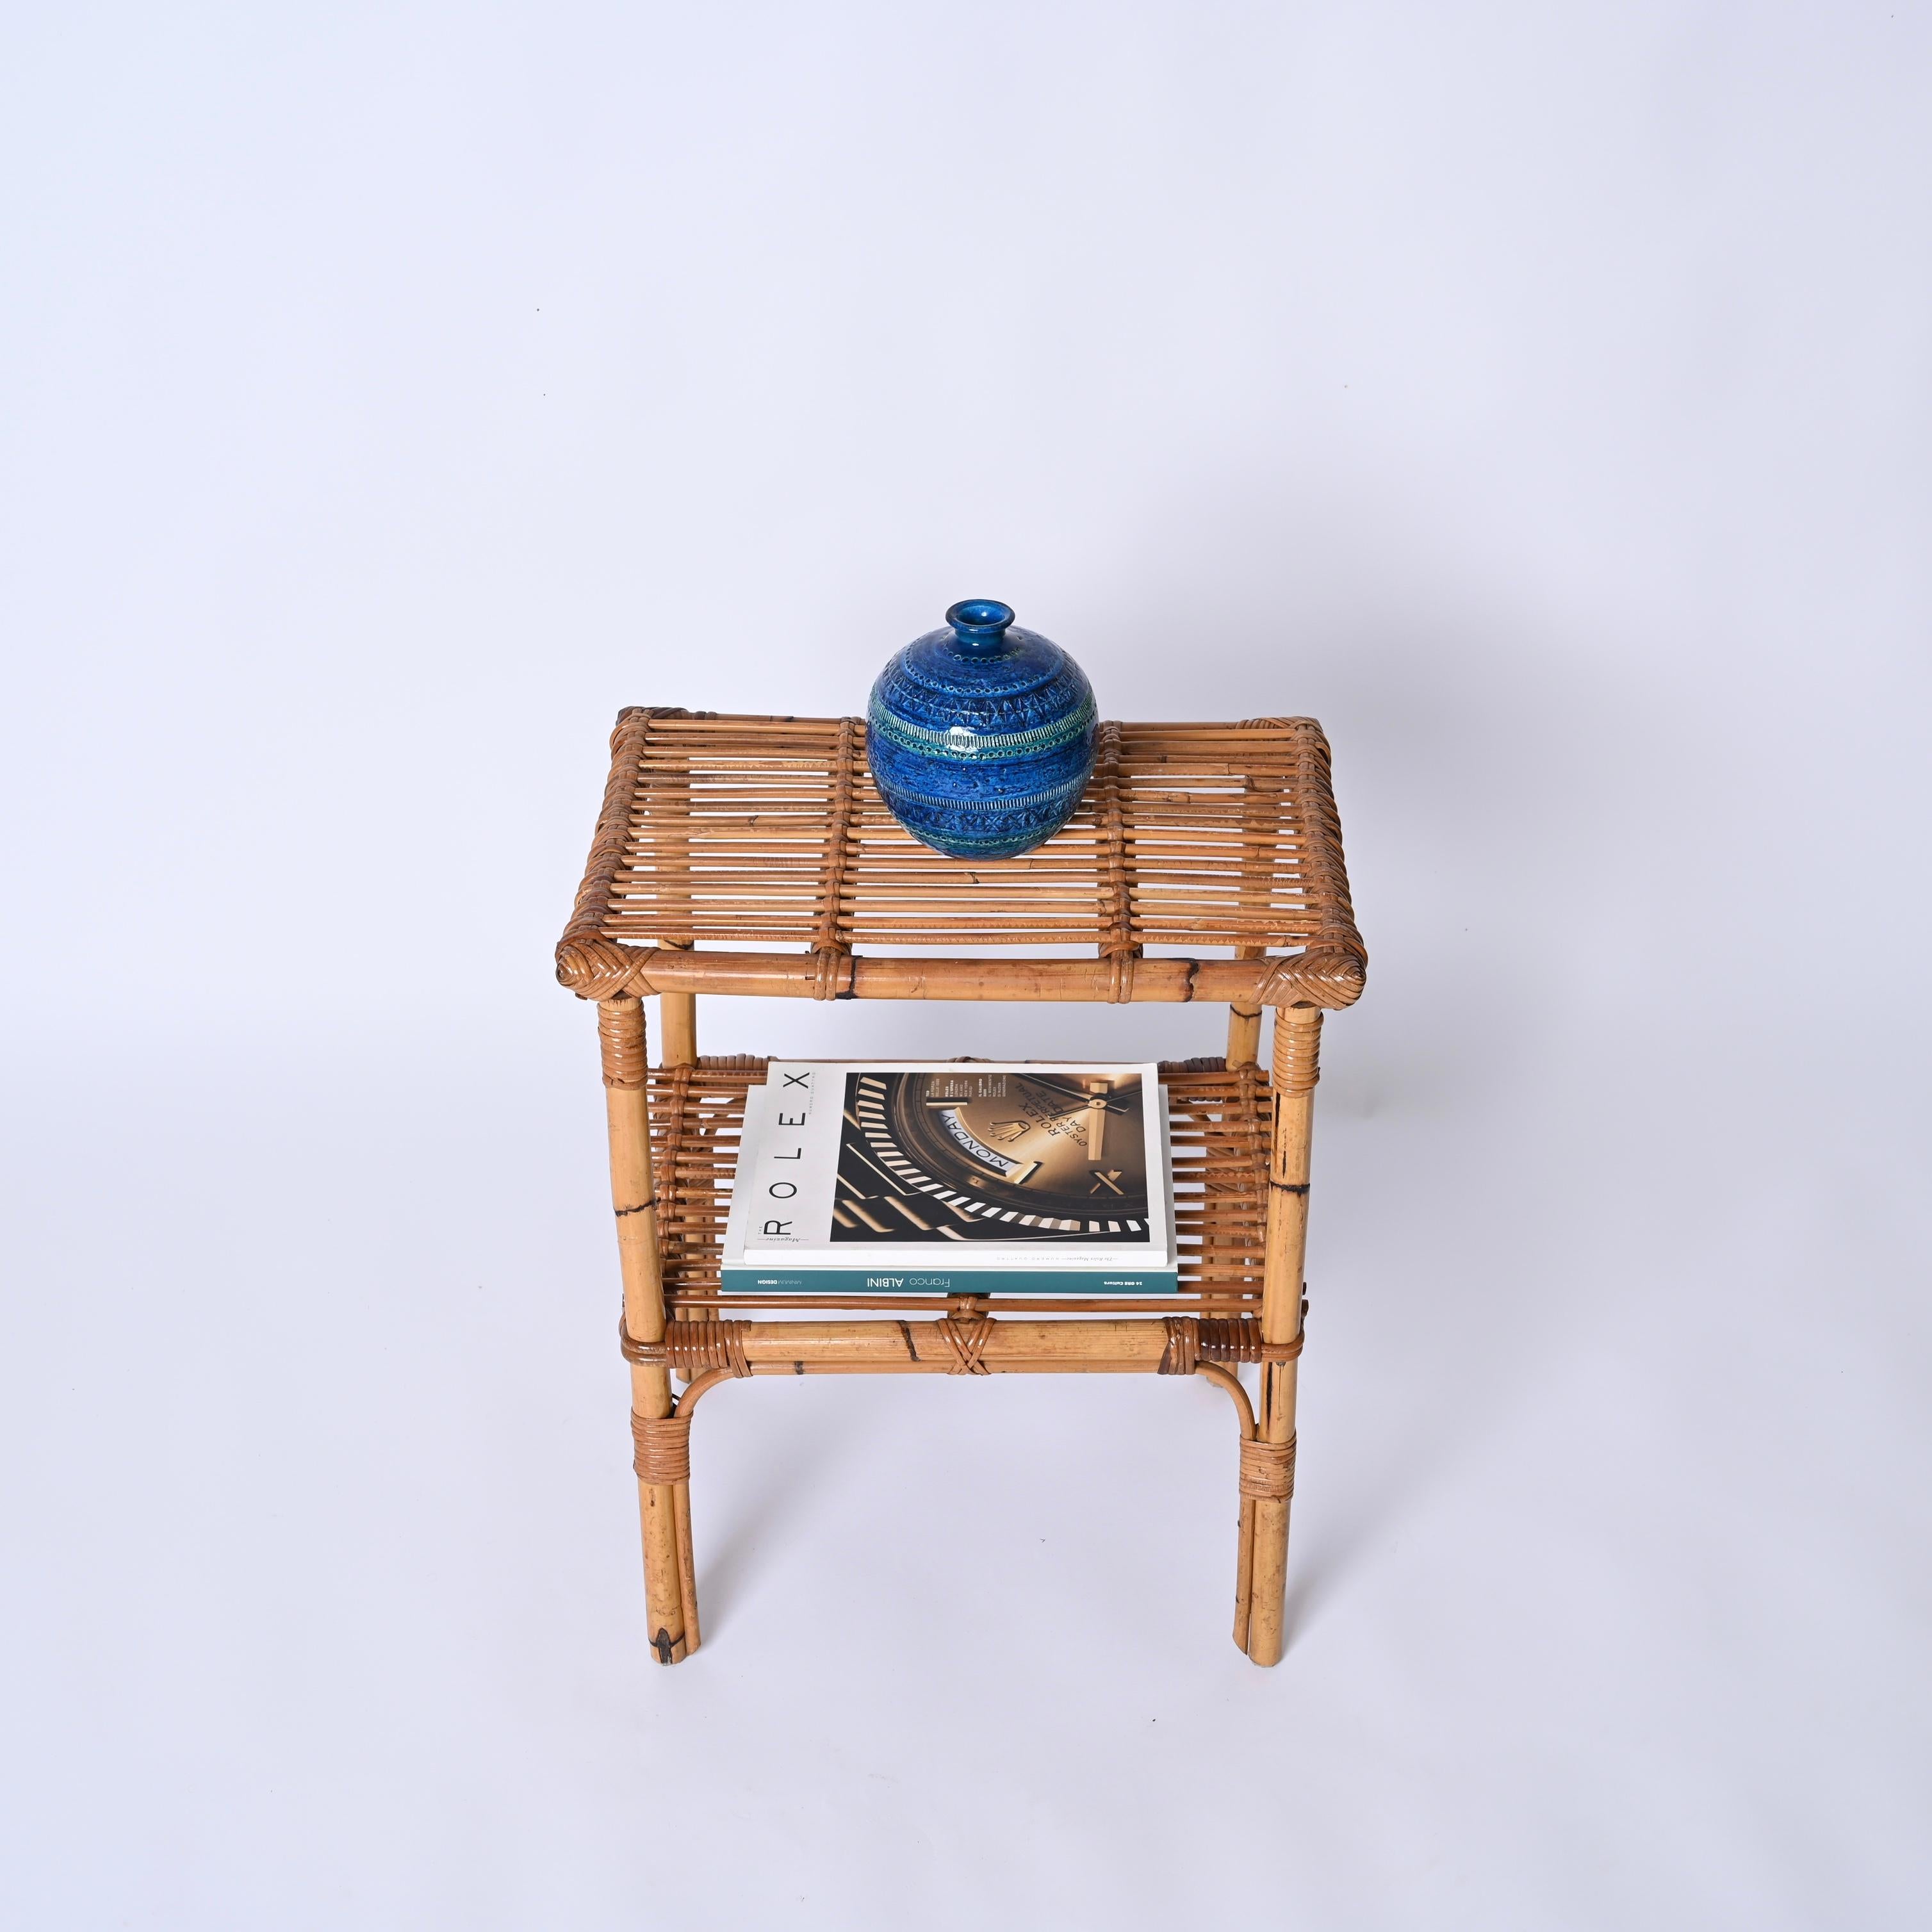 Midcentury Italian Coffee Table in Bamboo and Rattan, Italy 1960s For Sale 4